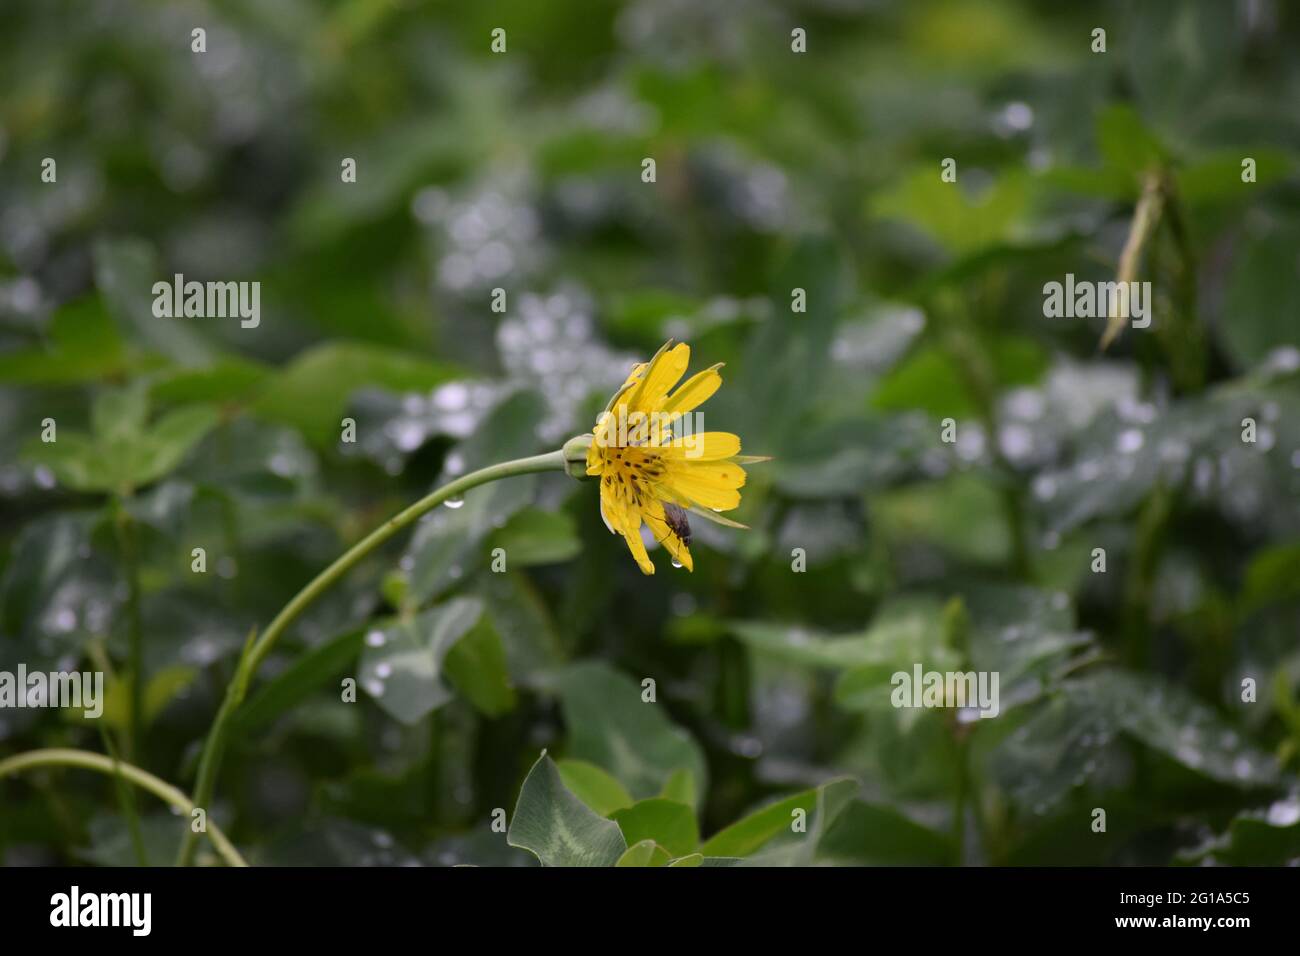 Field marigold with Insect after Downpour Stock Photo